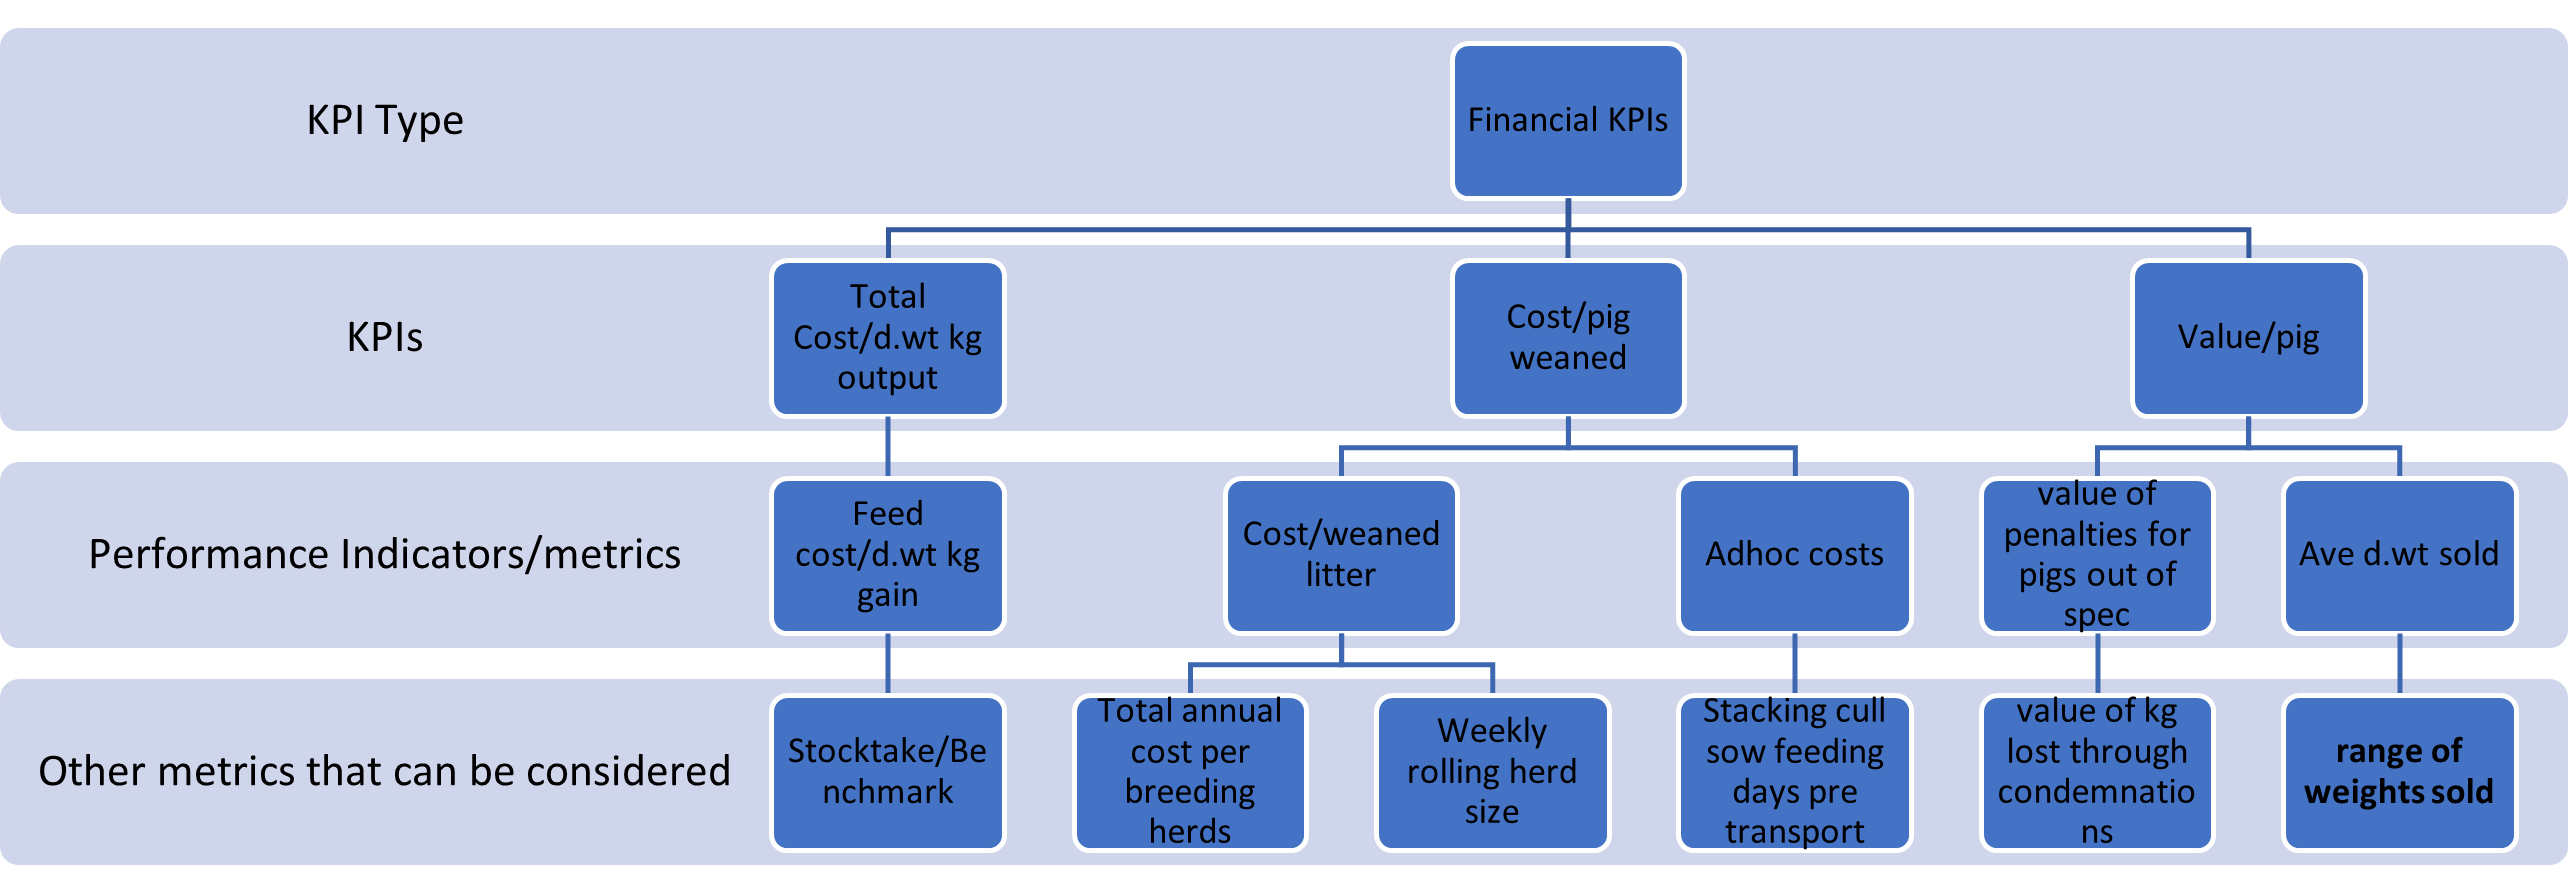 Performance indicator chart representing financial KPIs of a pig unit